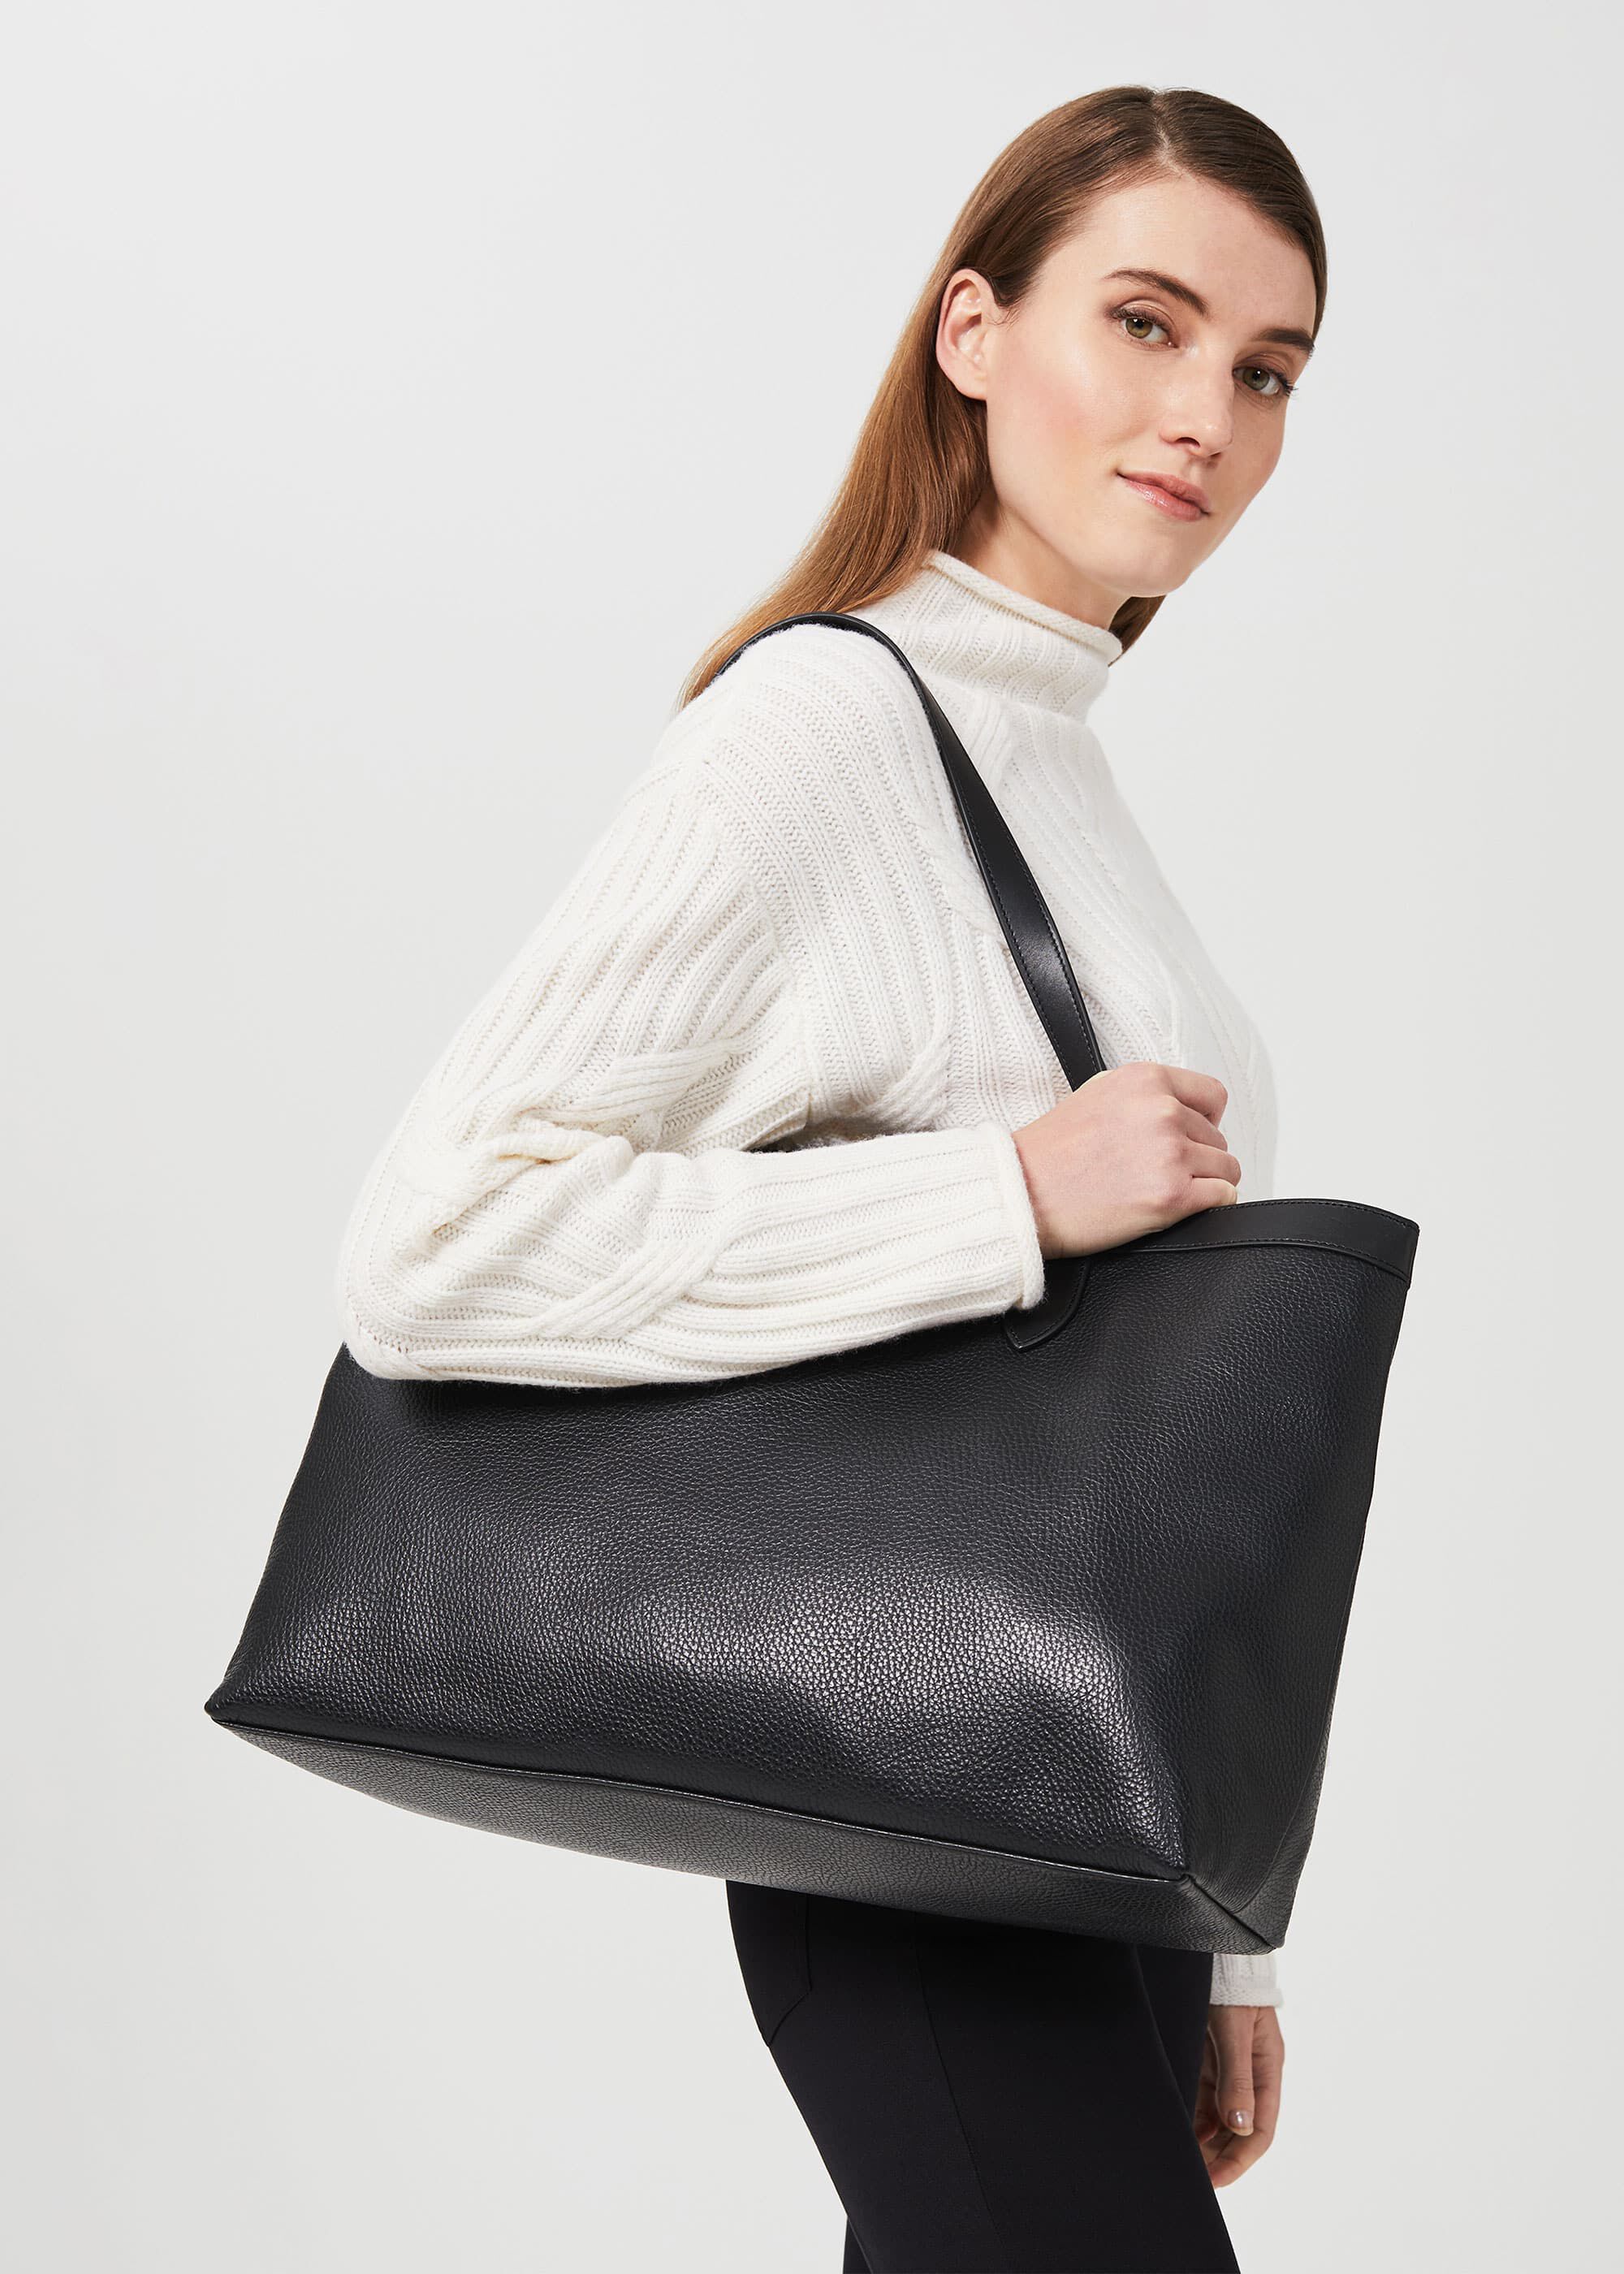 Hobbs Leather Bag Best Sale, UP TO 64% OFF | www.aramanatural.es